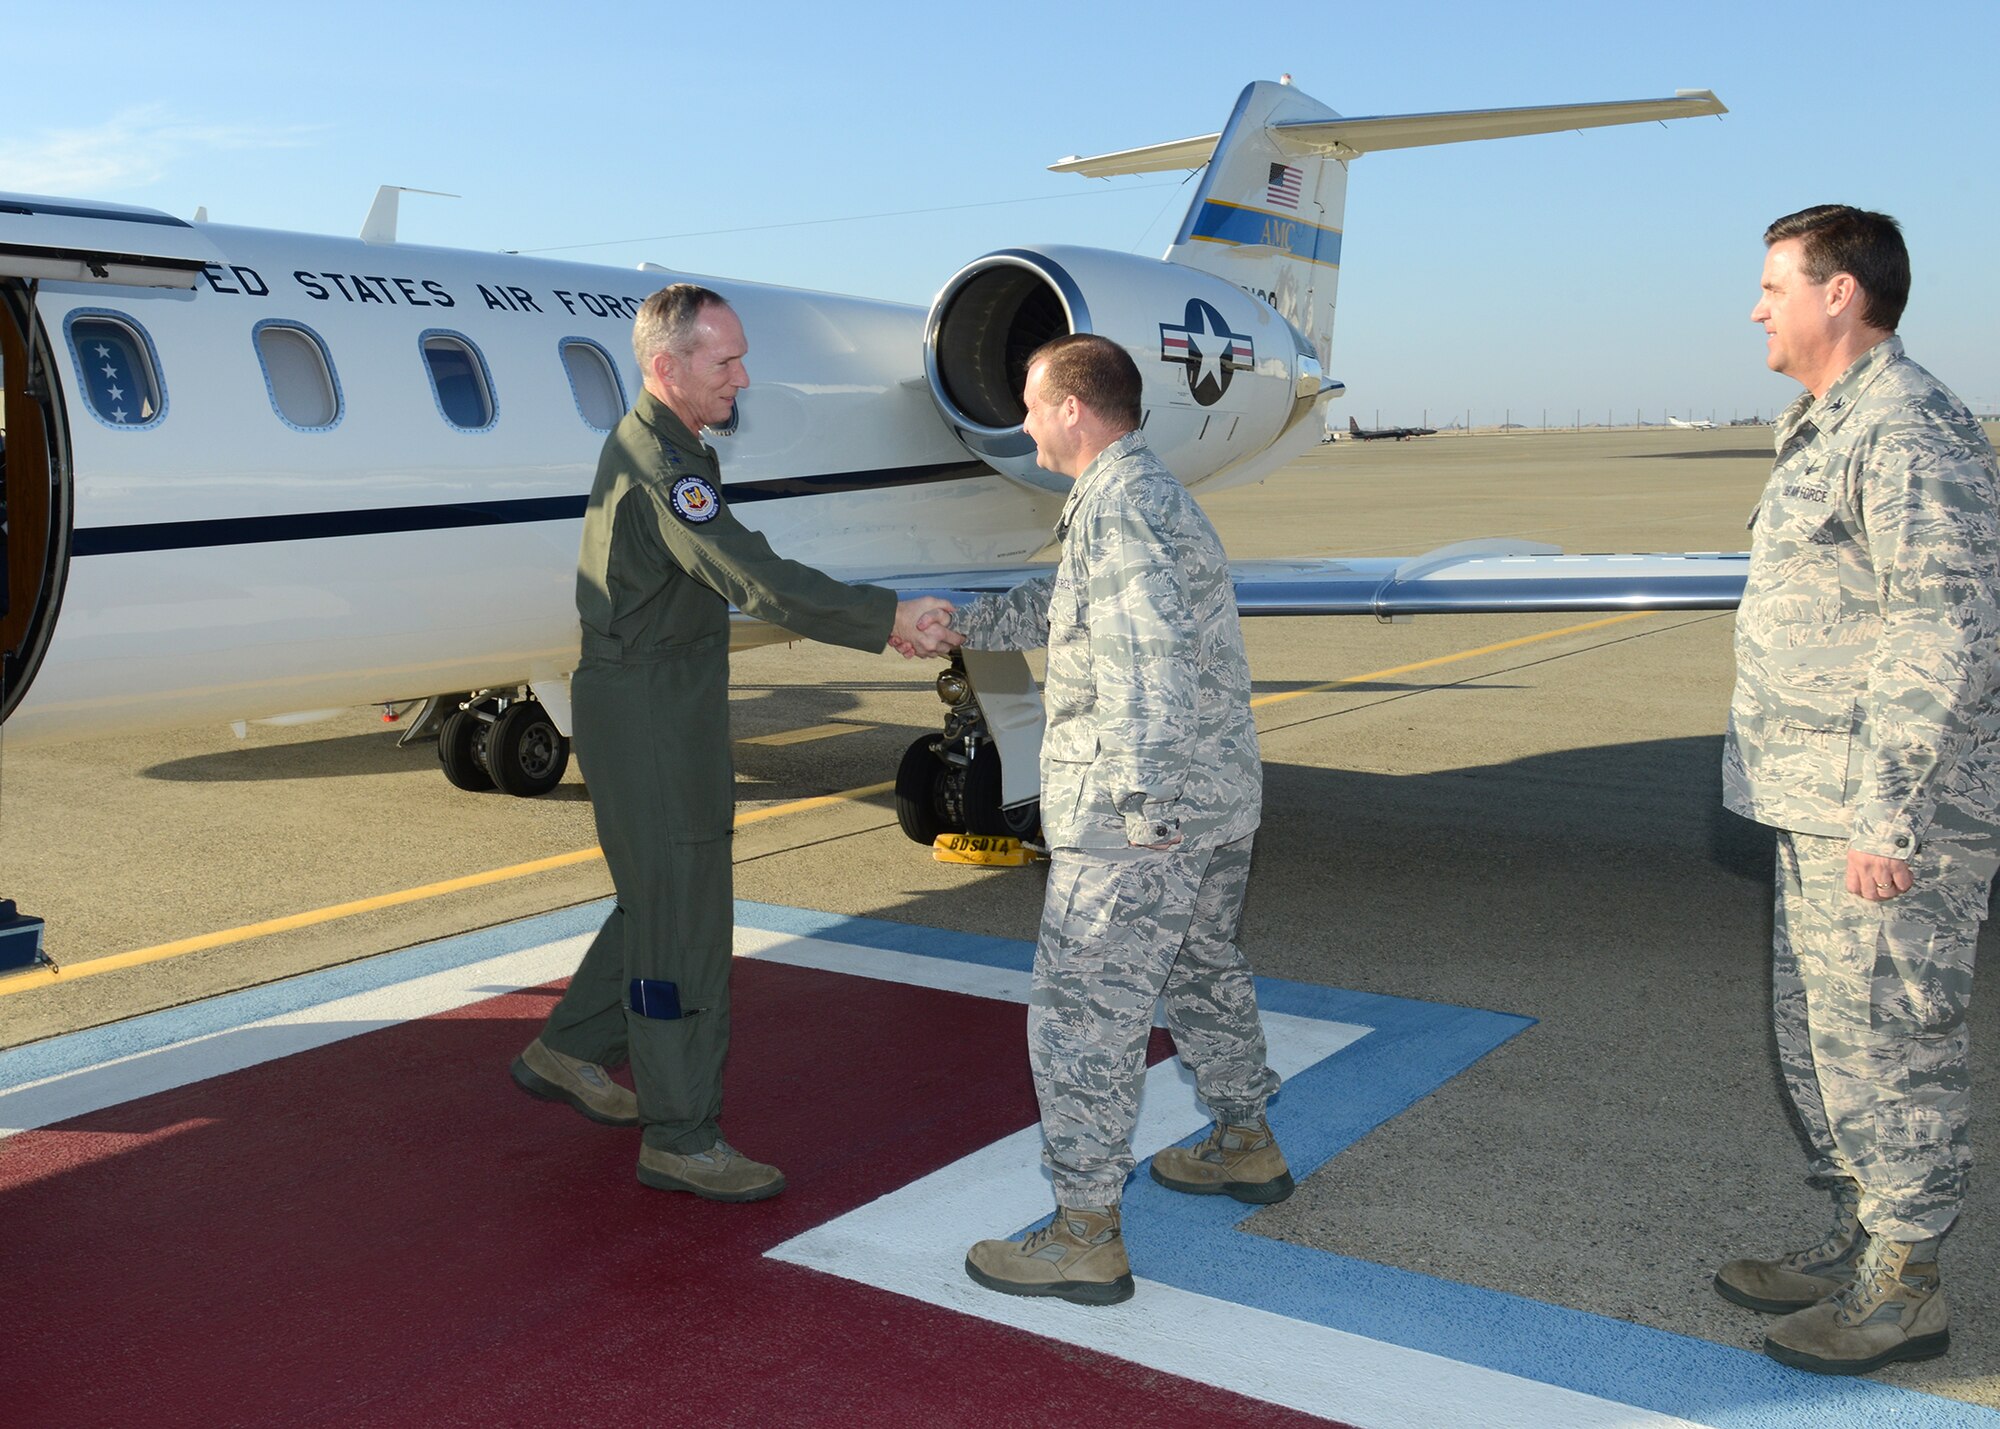 Gen. Mike Hostage, commander of Air Combat Command, greets Col. Phil Stewart, 9th Reconnaissance Wing commander, during a visit to Beale Air Force Base, Calif., Jan. 14, 2014. Hostage toured Beale and held a Q&A during an Airmen’s call. (U.S. Air Force photo by John Schwab)